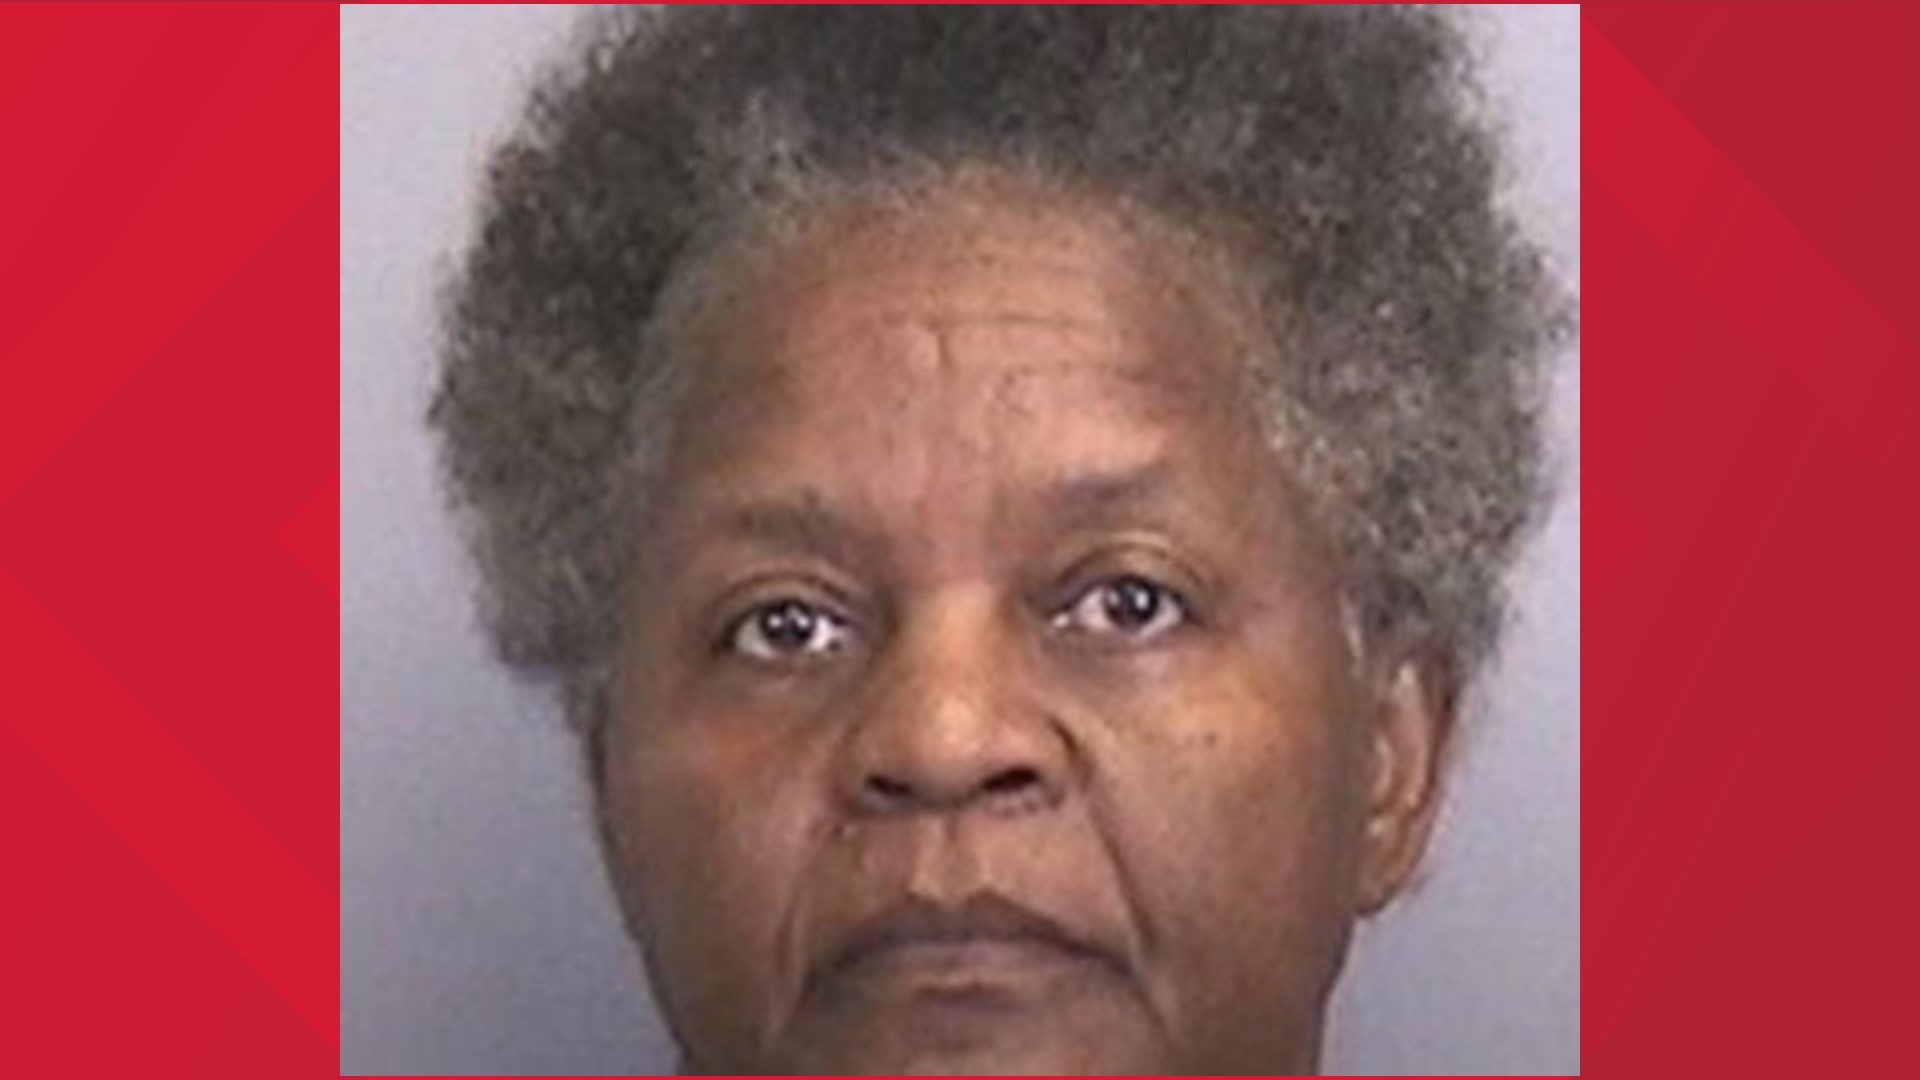 Deputy Tases 70 Year Old Woman While Trying To Make Arrest